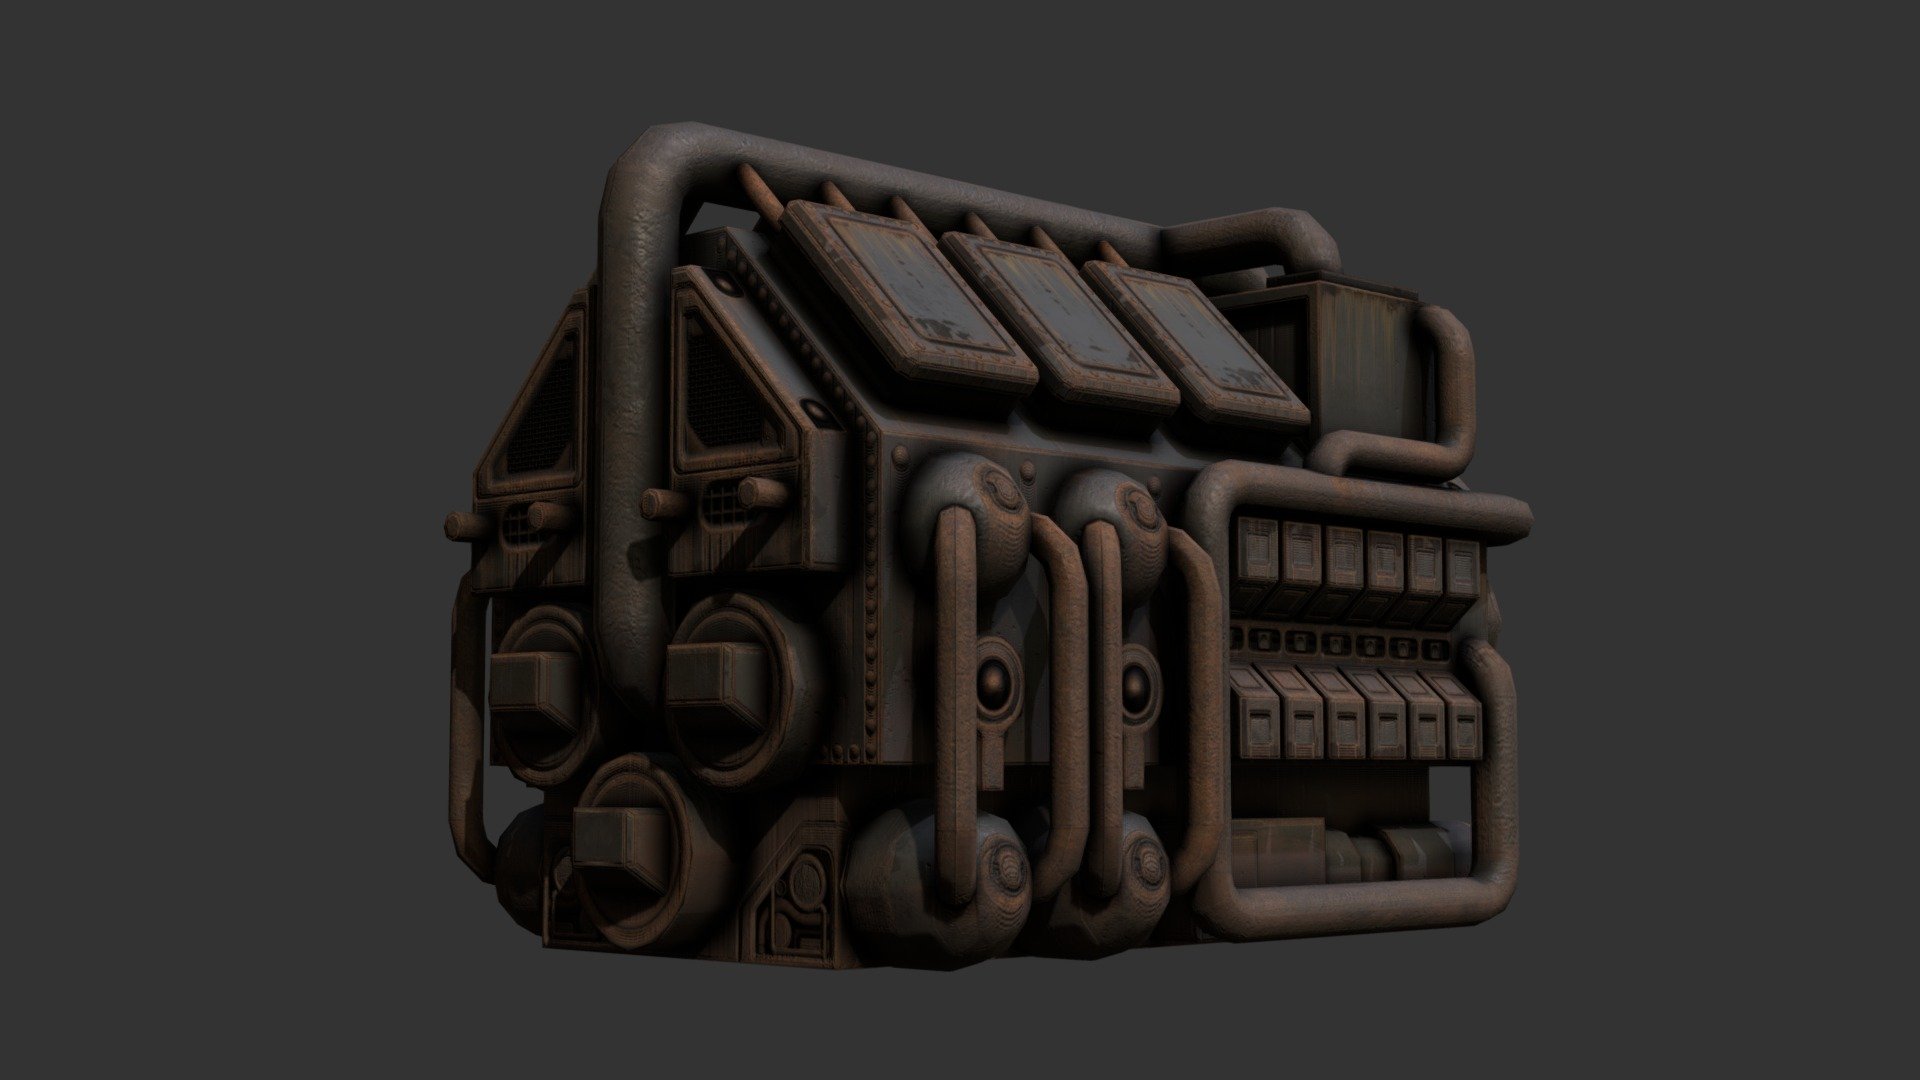 That feeling when today's warm-up doodle becomes today's production. It''s some kind of mechanical boiler/engine thing.

Made with 3DSMax and Substance Painter - Boiler - 3D model by Renafox (@kryik1023) 3d model